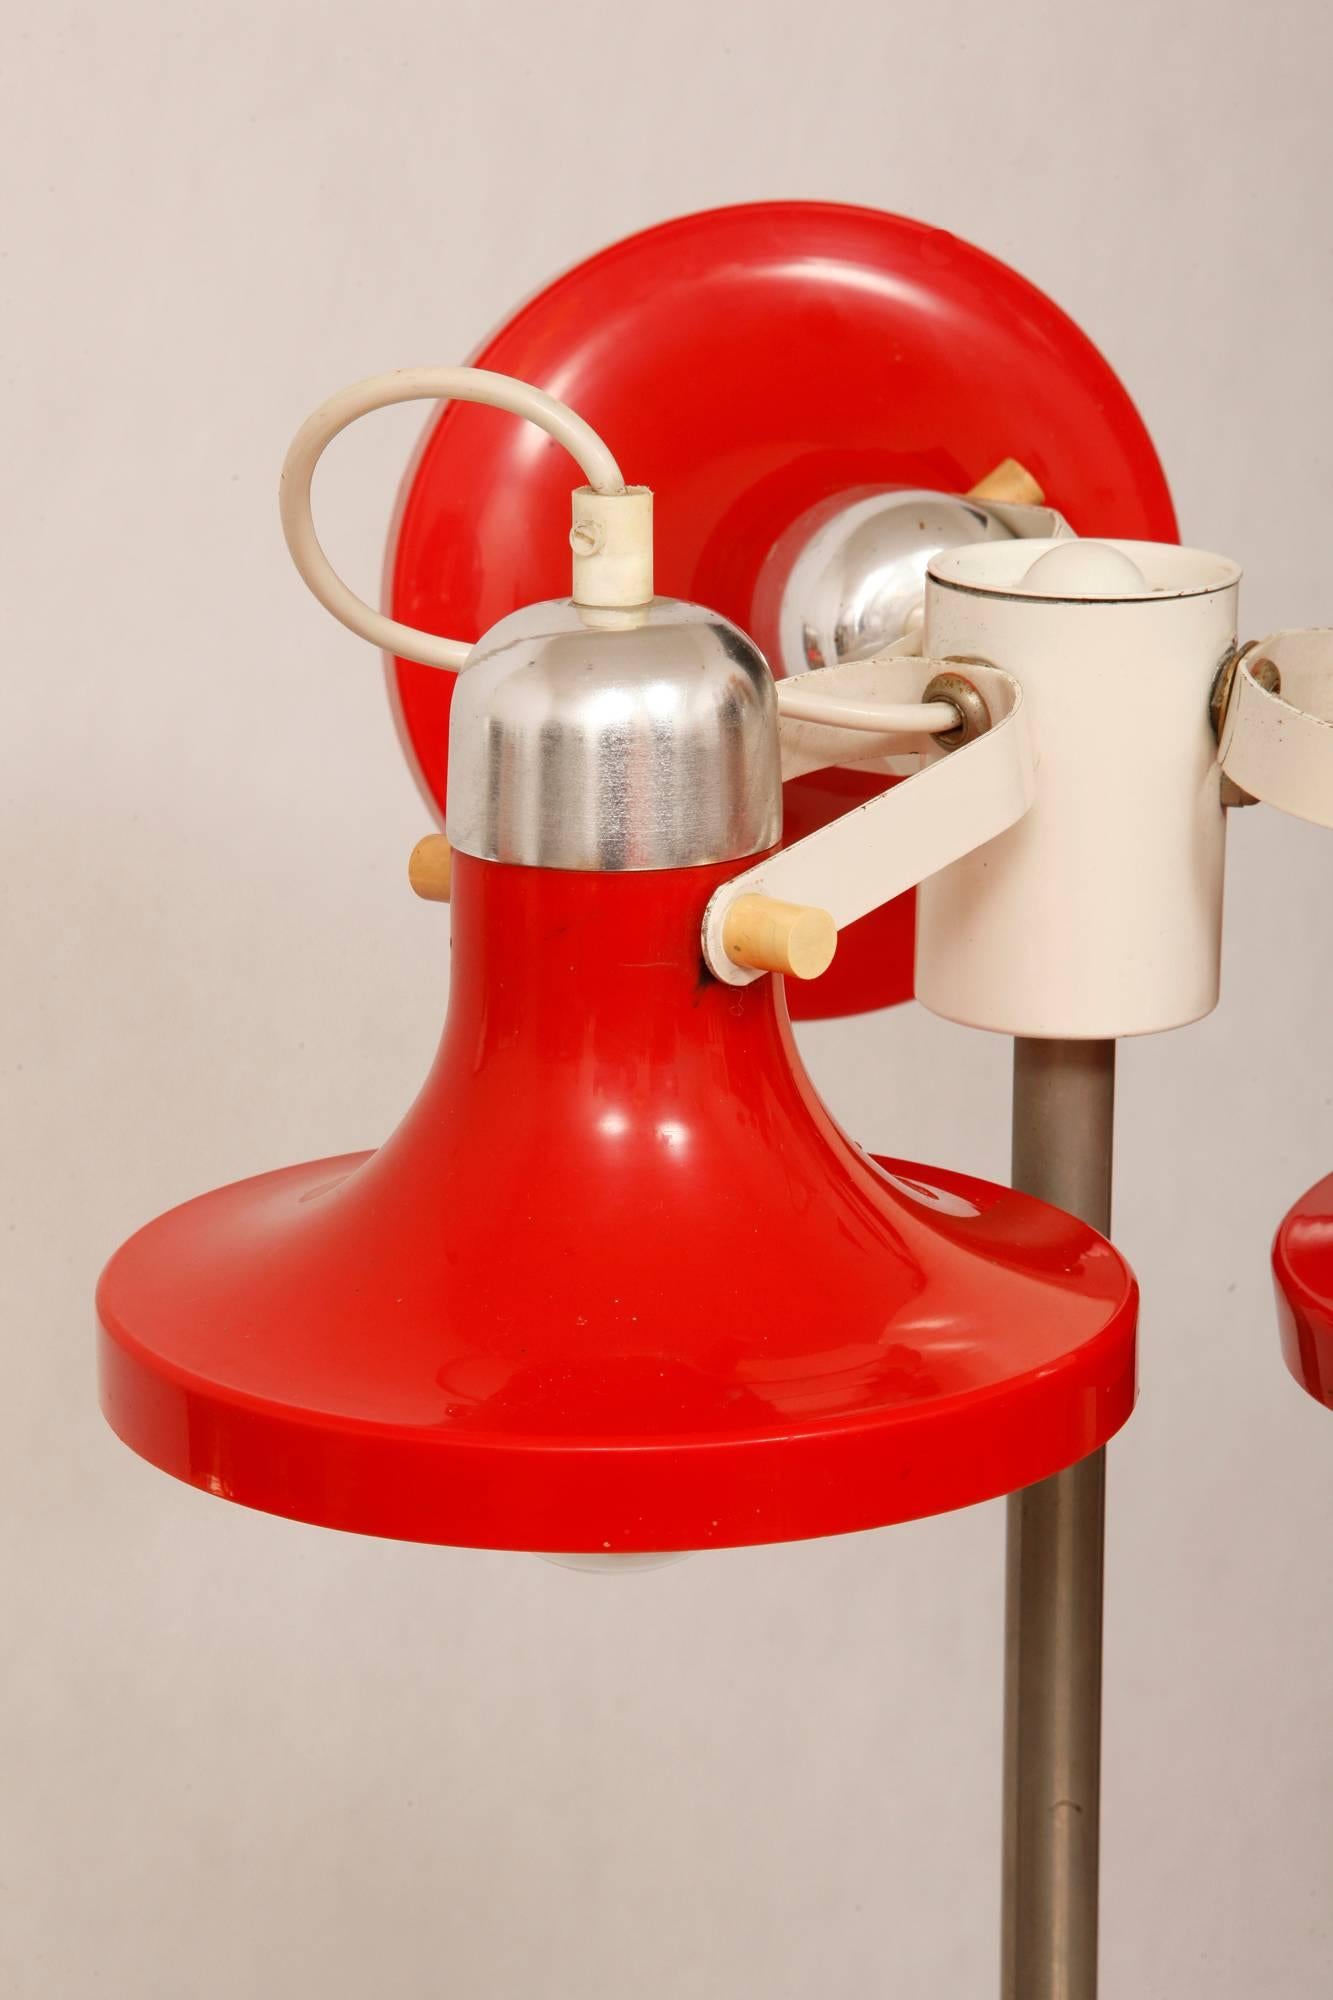 A red floor lamp that refers to the Space Age style from East Germany preserved in very good natural condition. Three rotating points of light mounted on a single arm. Heavy cast iron base. The lamp has a small wear abrasions of red lacquer visible